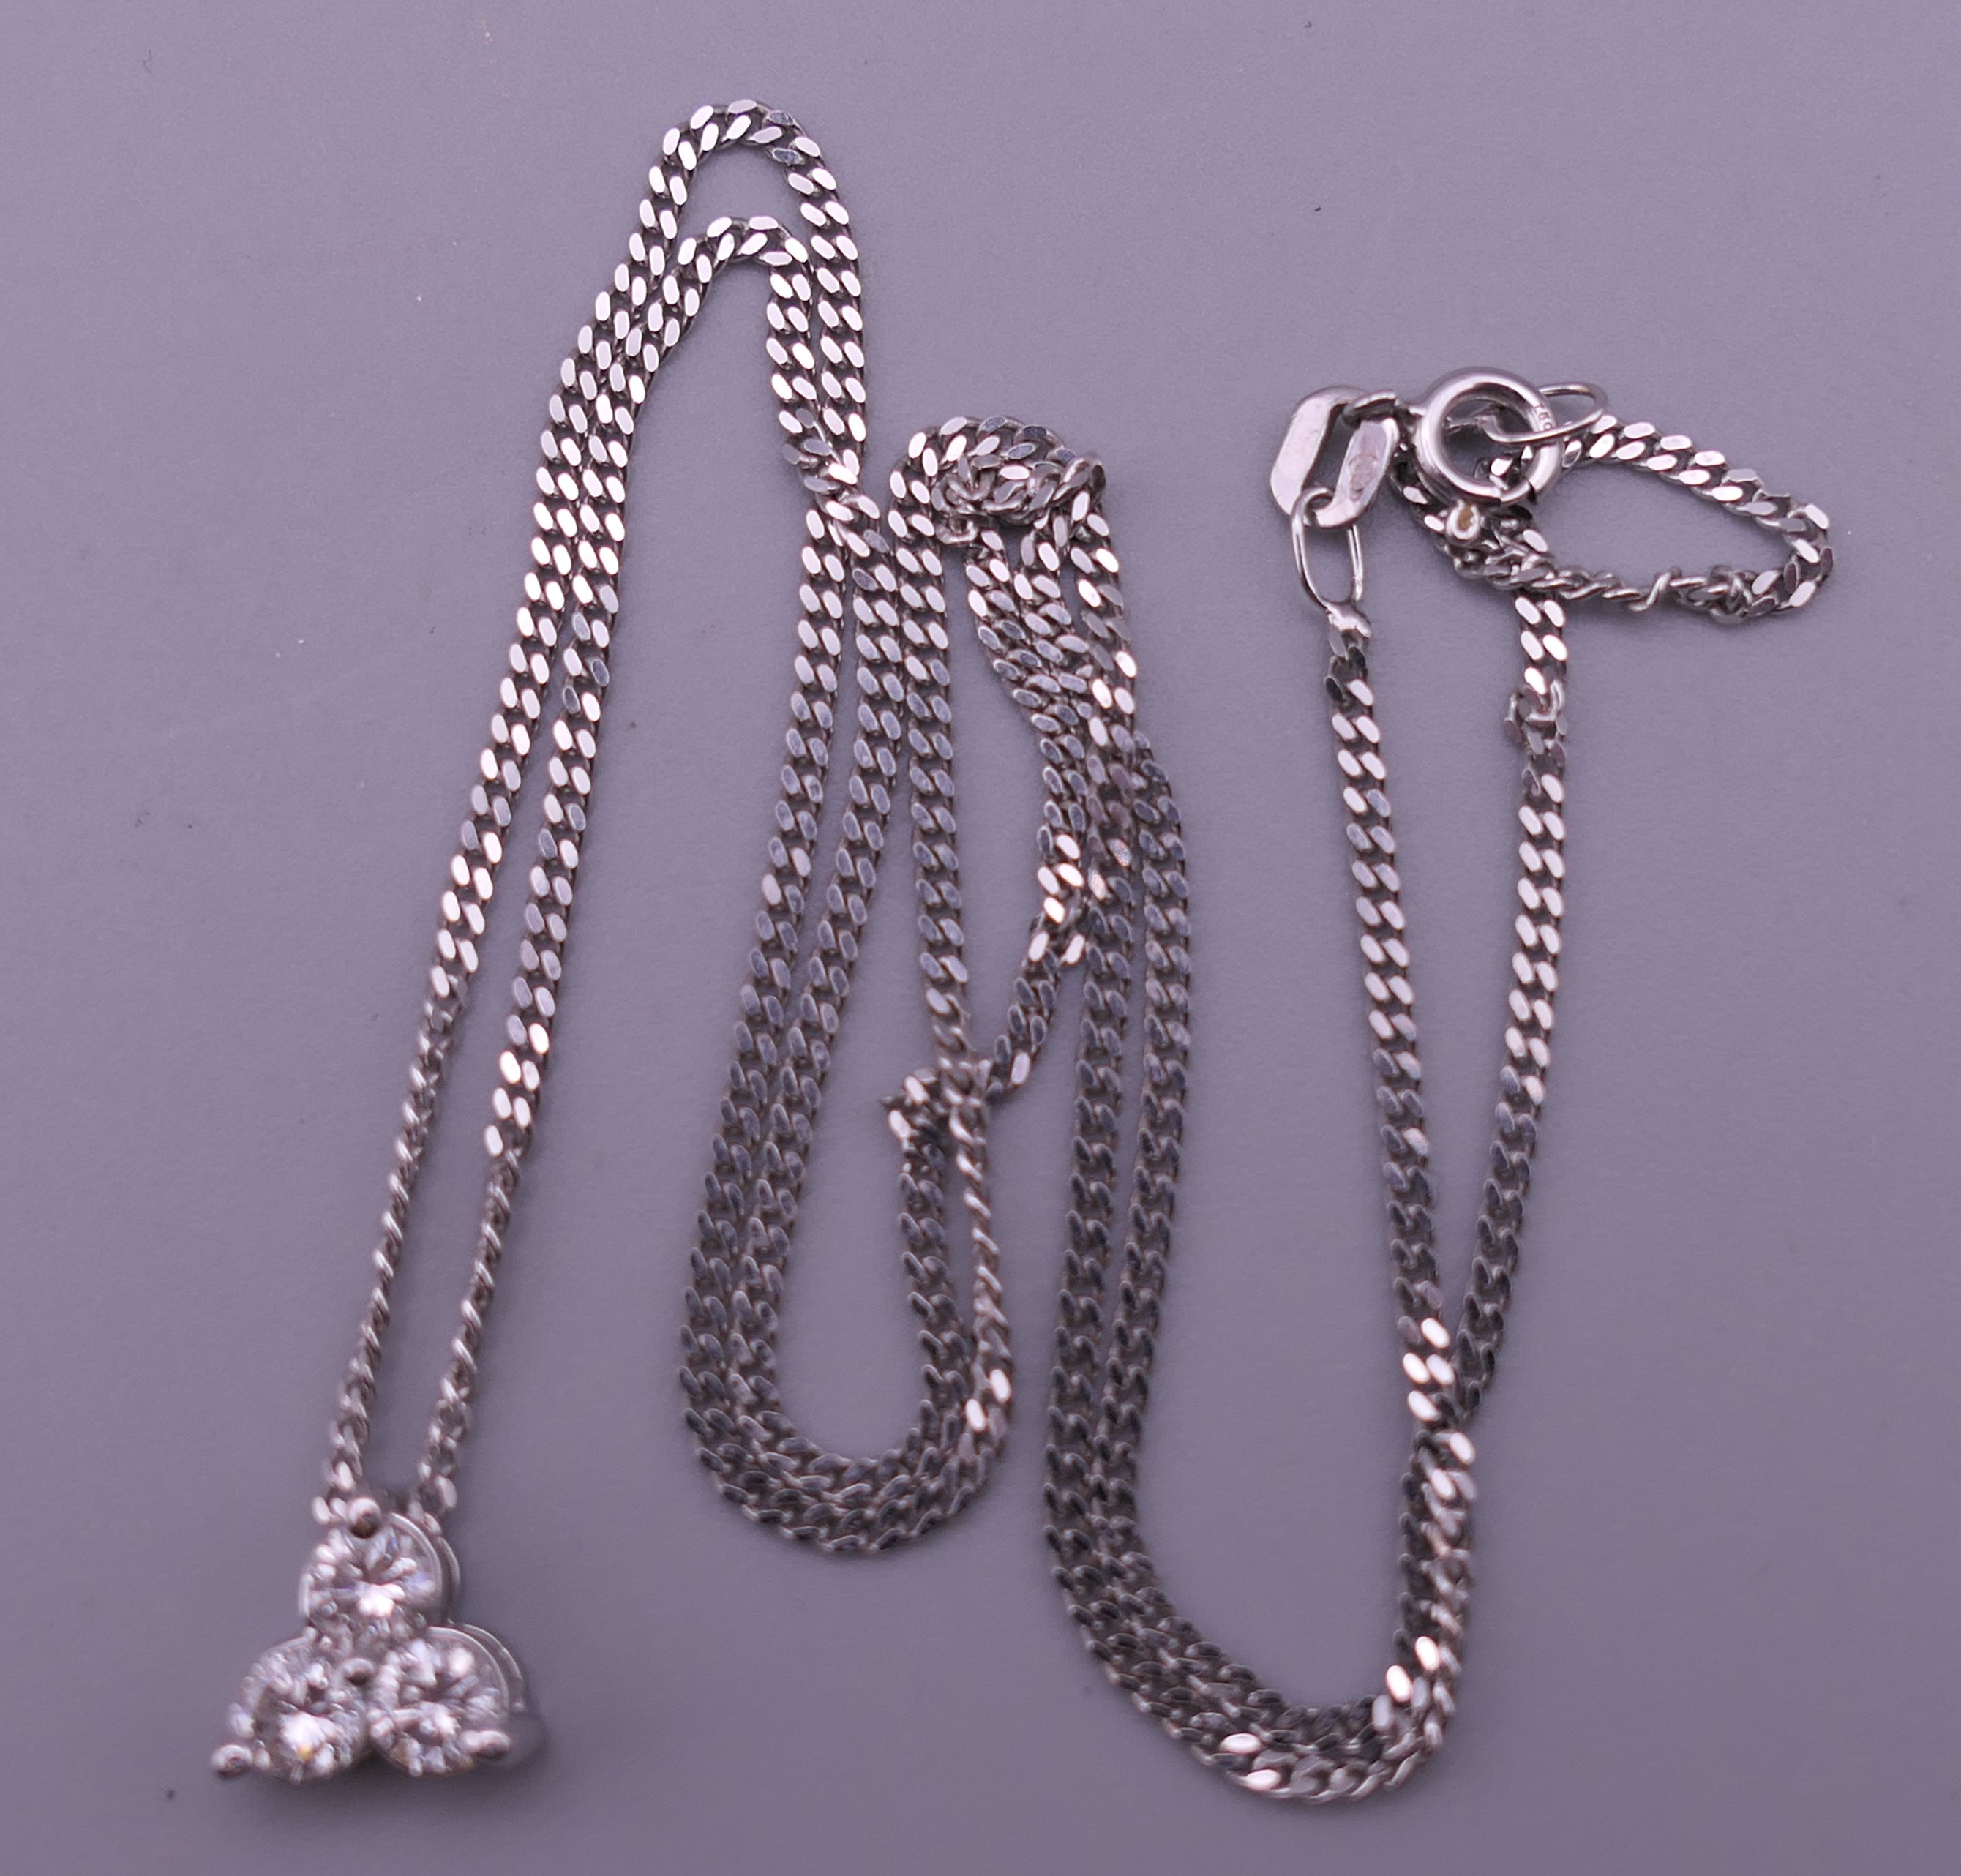 An 18 ct white gold and diamond necklace and pendant and a pair of matching earrings. - Image 5 of 8